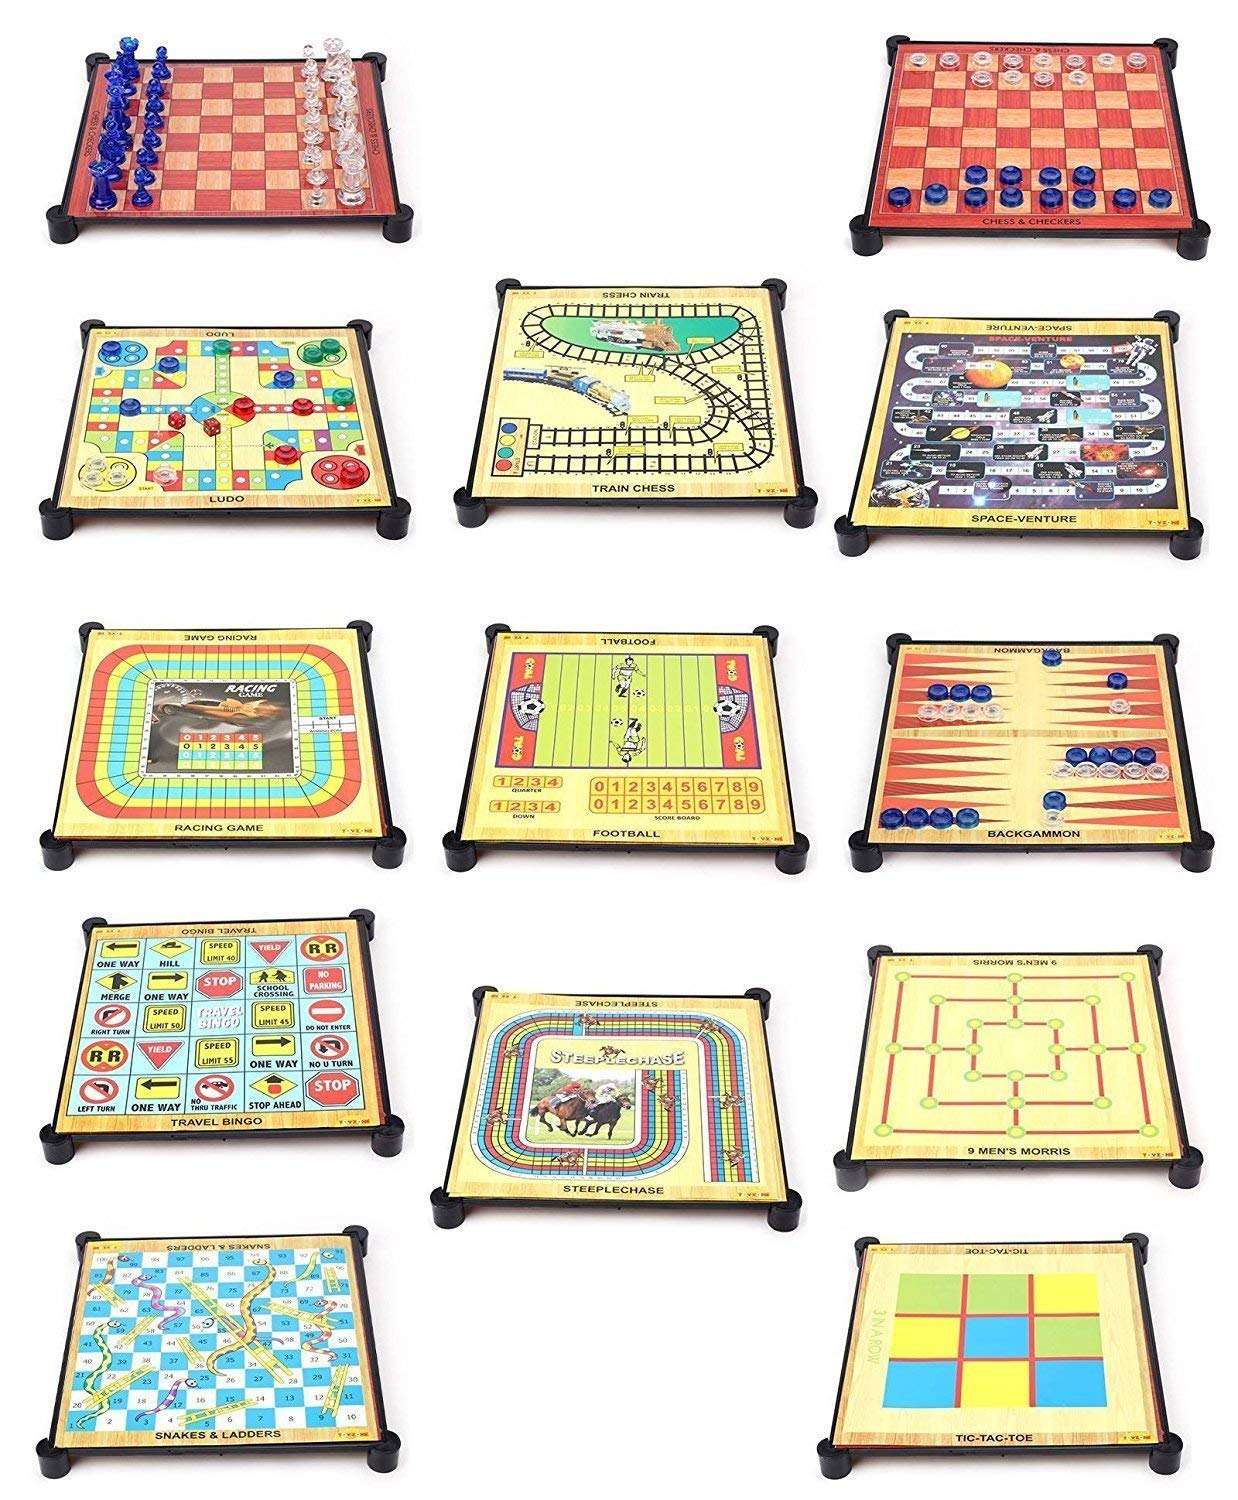 AZi 13 in 1 Family Board Game Including Chess Travel Bingo Ludo and Racing Game Amazing Toy Indoor Outdoor Home Playing Best Birthday Gift for Children Boys Girls